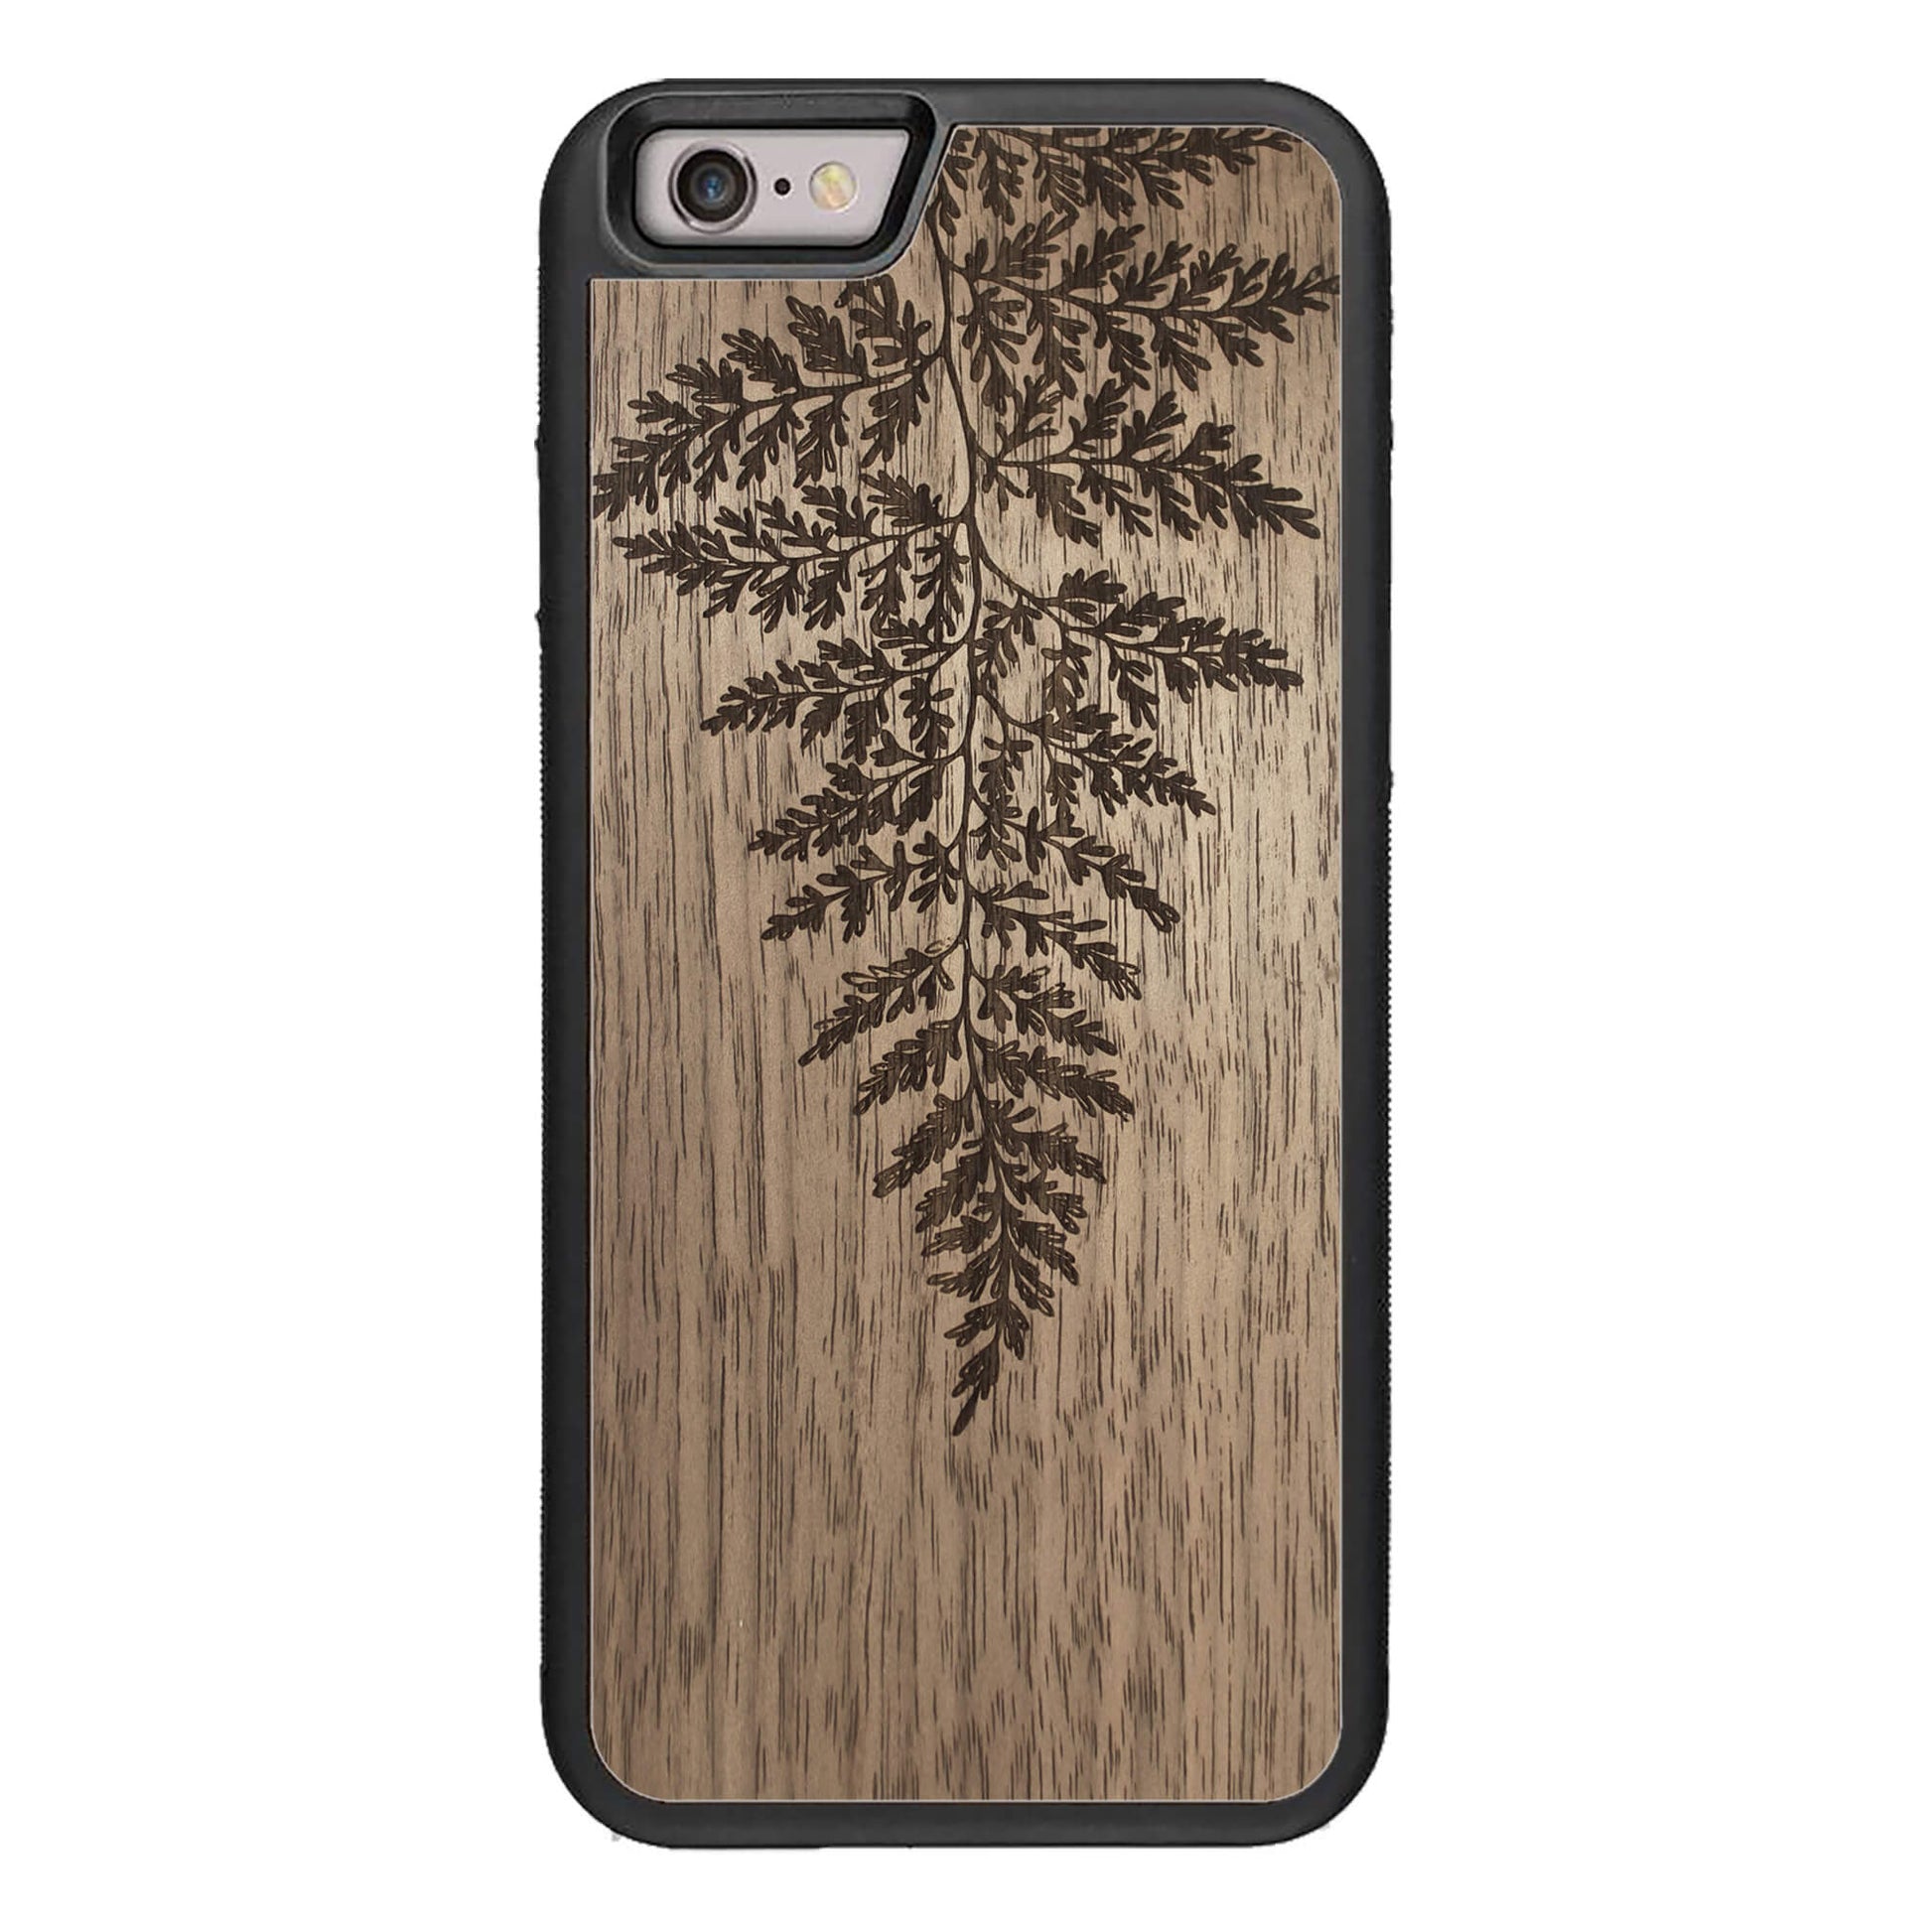 Wooden Case for iPhone 6/6S Fern